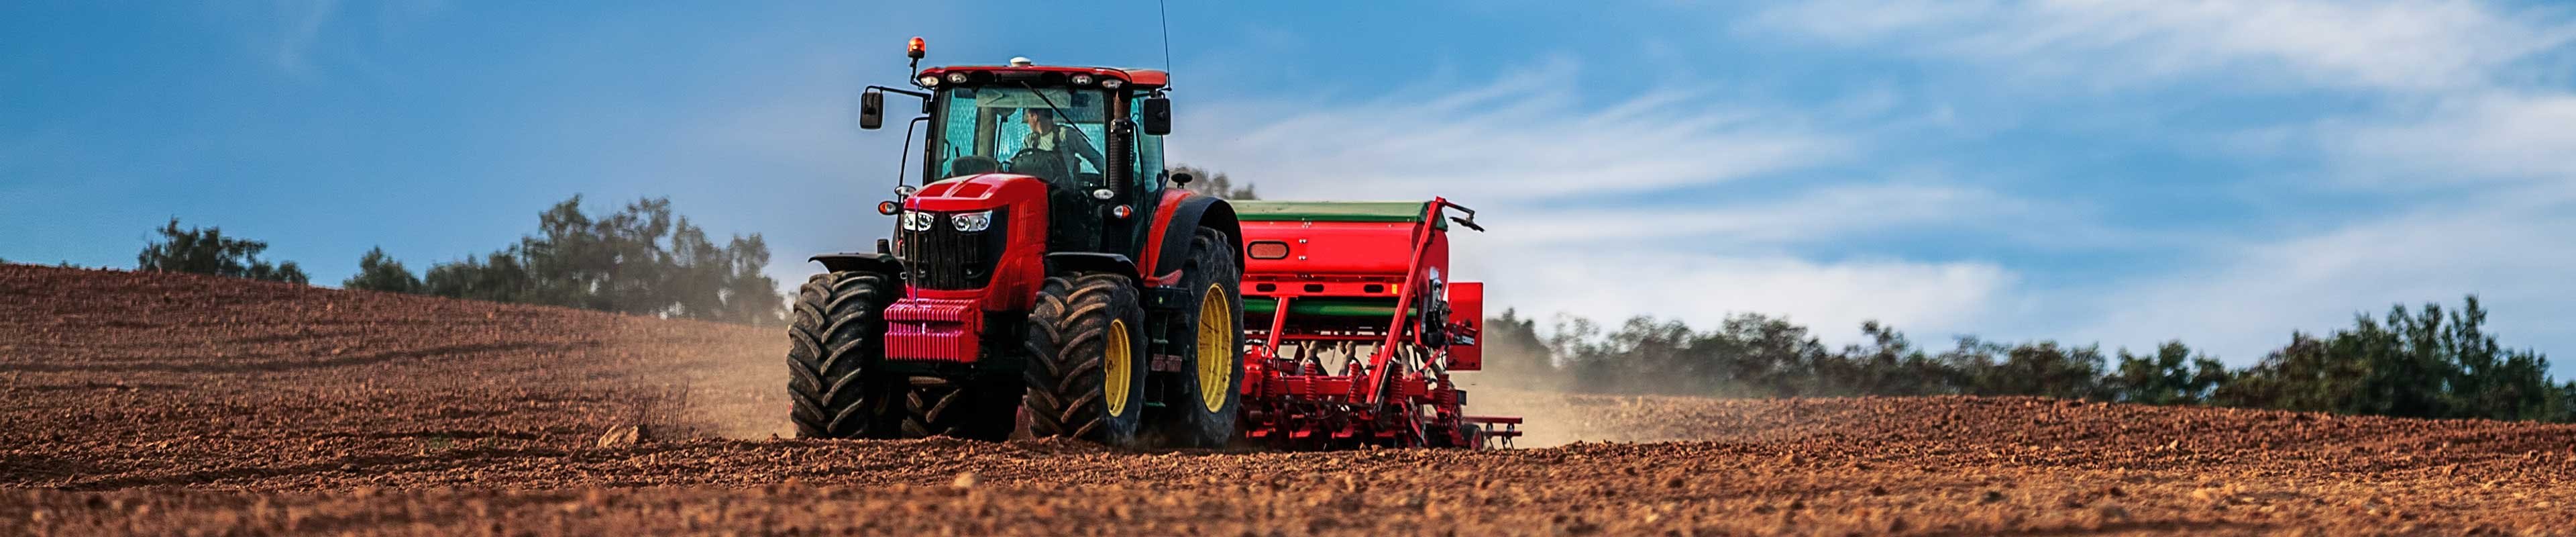 Image of a tractor and seeder rolling through an un-planted field.